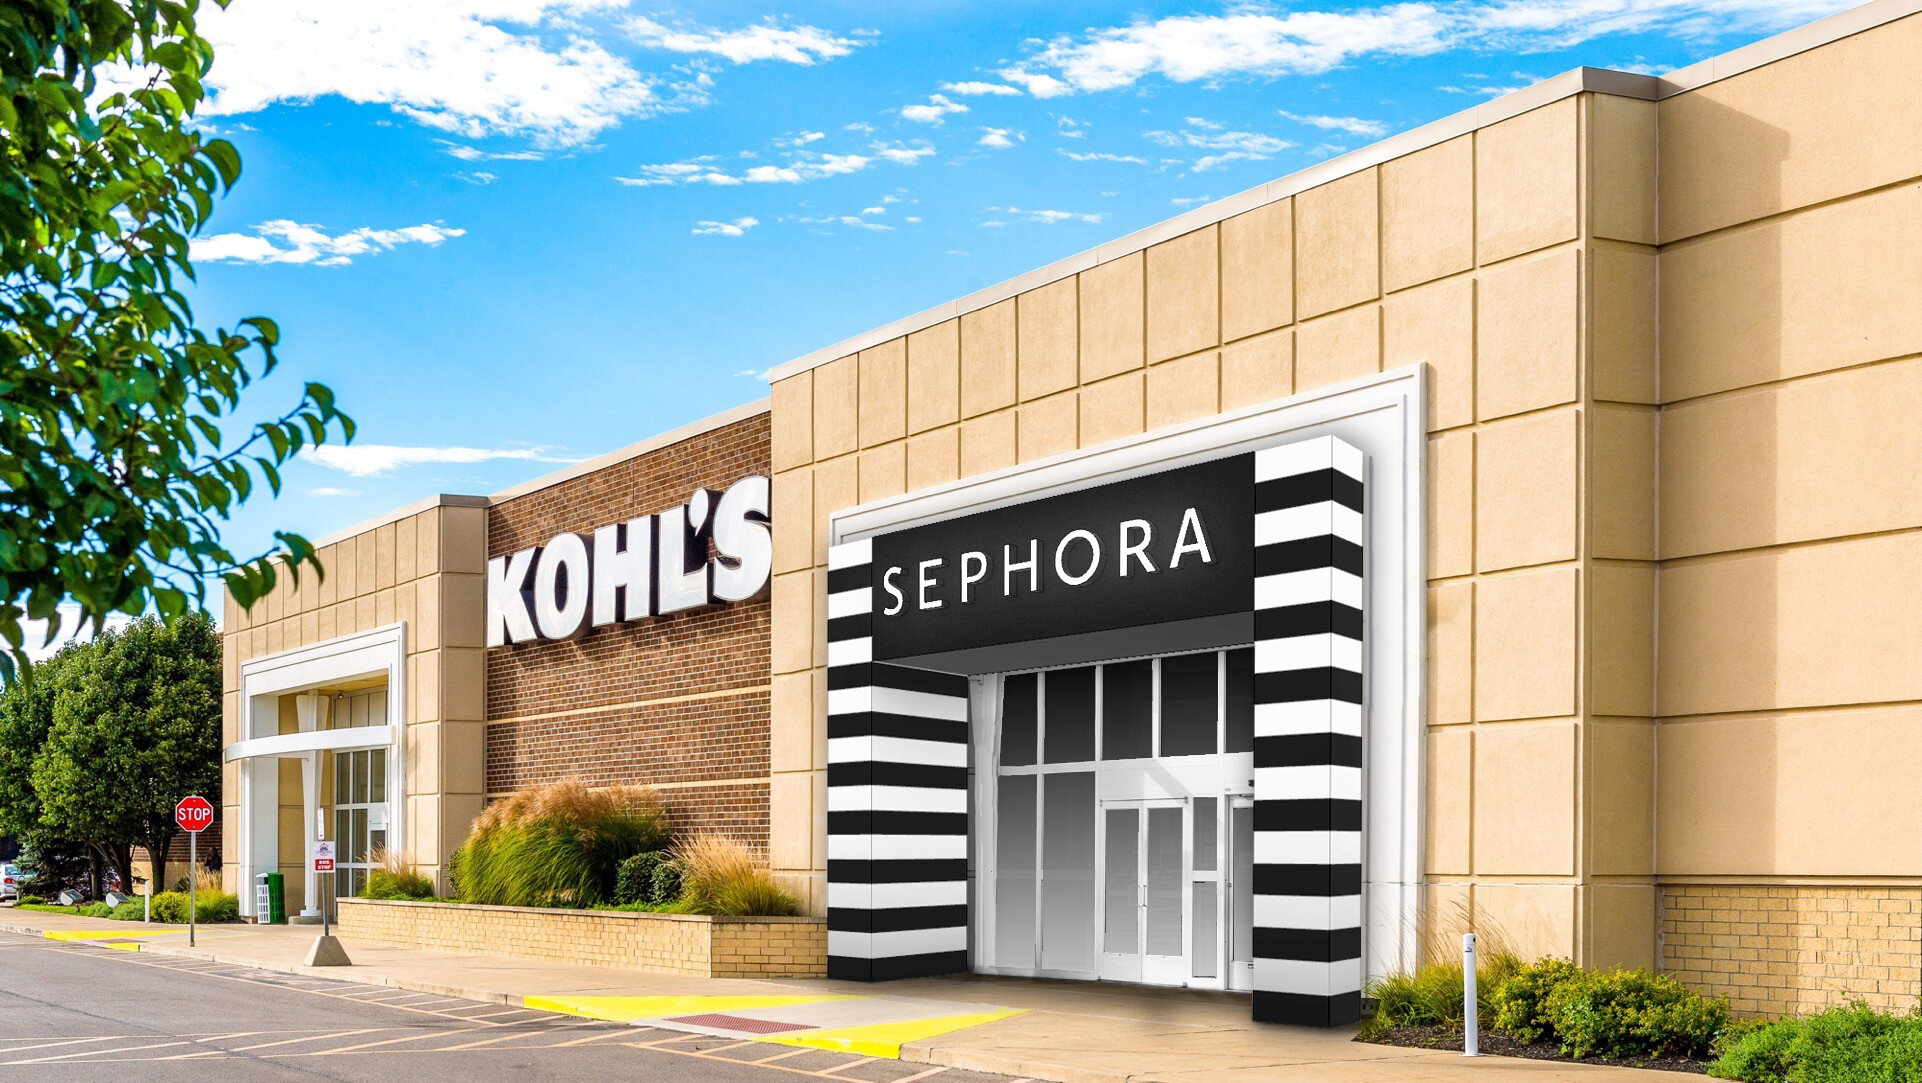 Kohl’s and Sephora Announce Major Long-Term Strategic Partnership Bringing Transformative Prestige Beauty Experience to Millions of Consumers